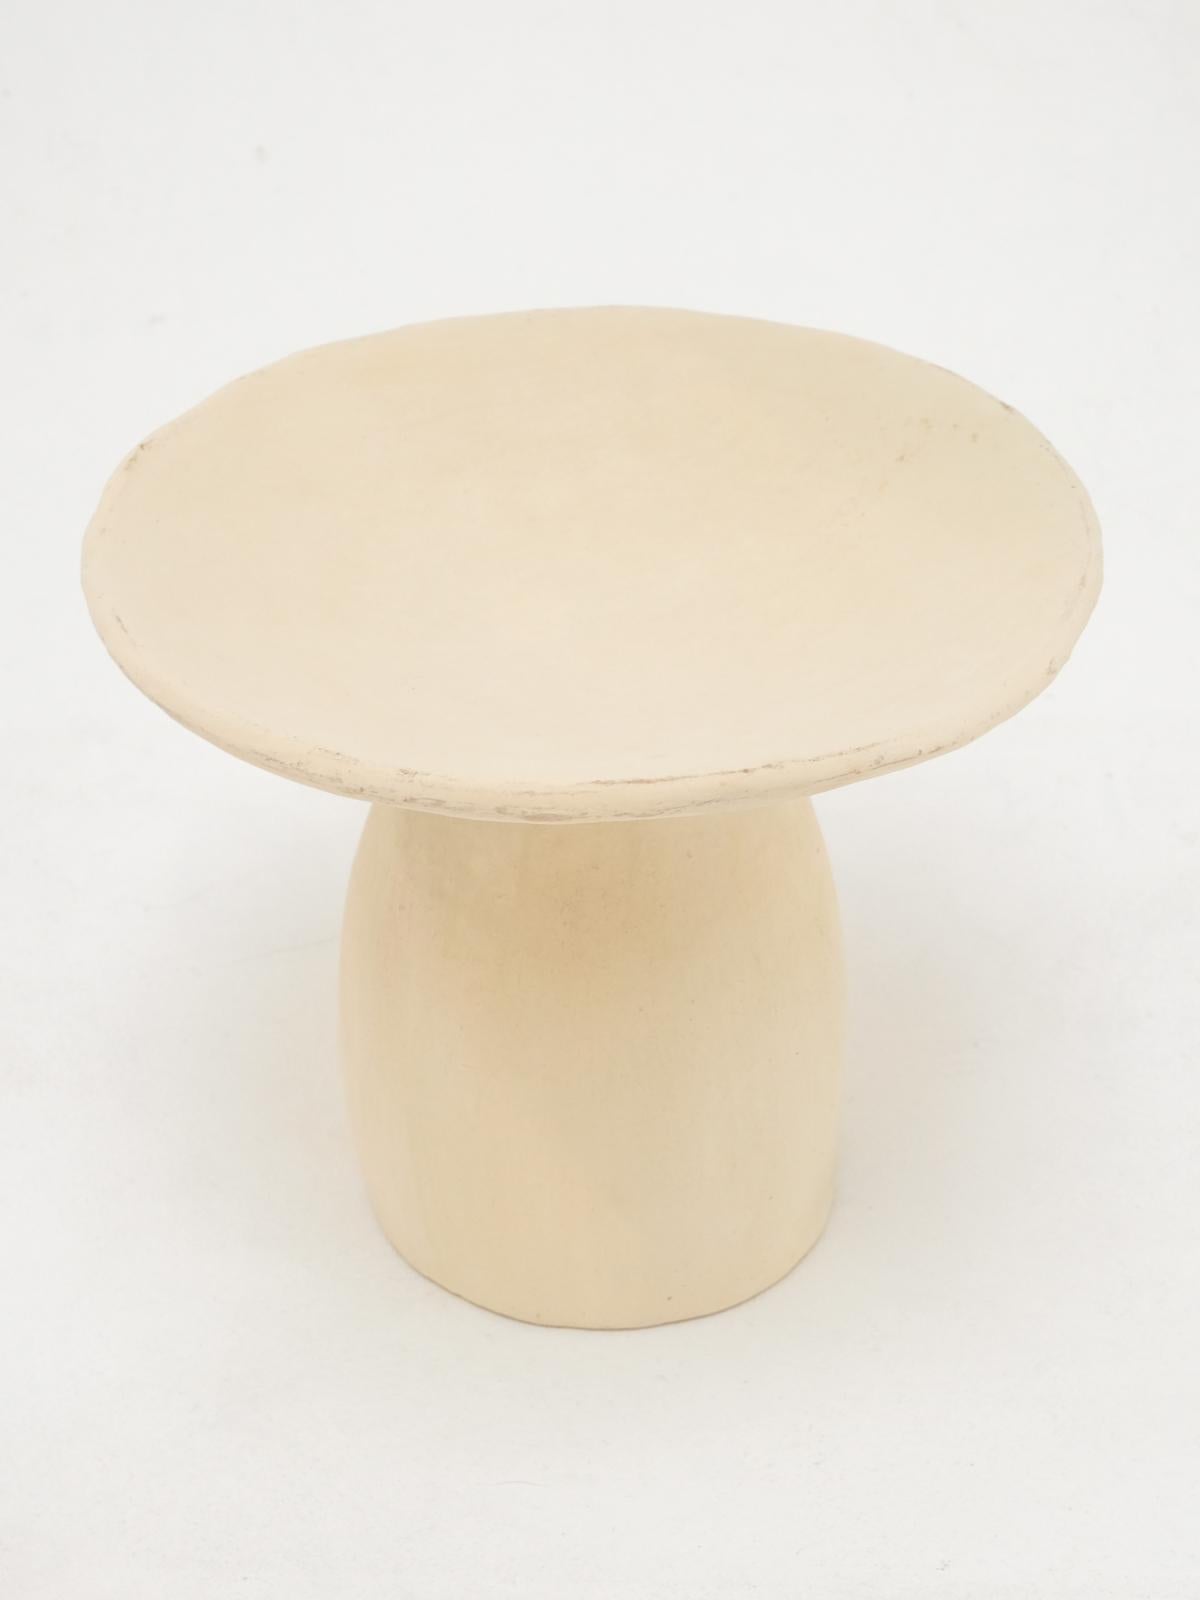 Fired White Side Tables Made of local Clay, natural pigments, Handcrafted For Sale